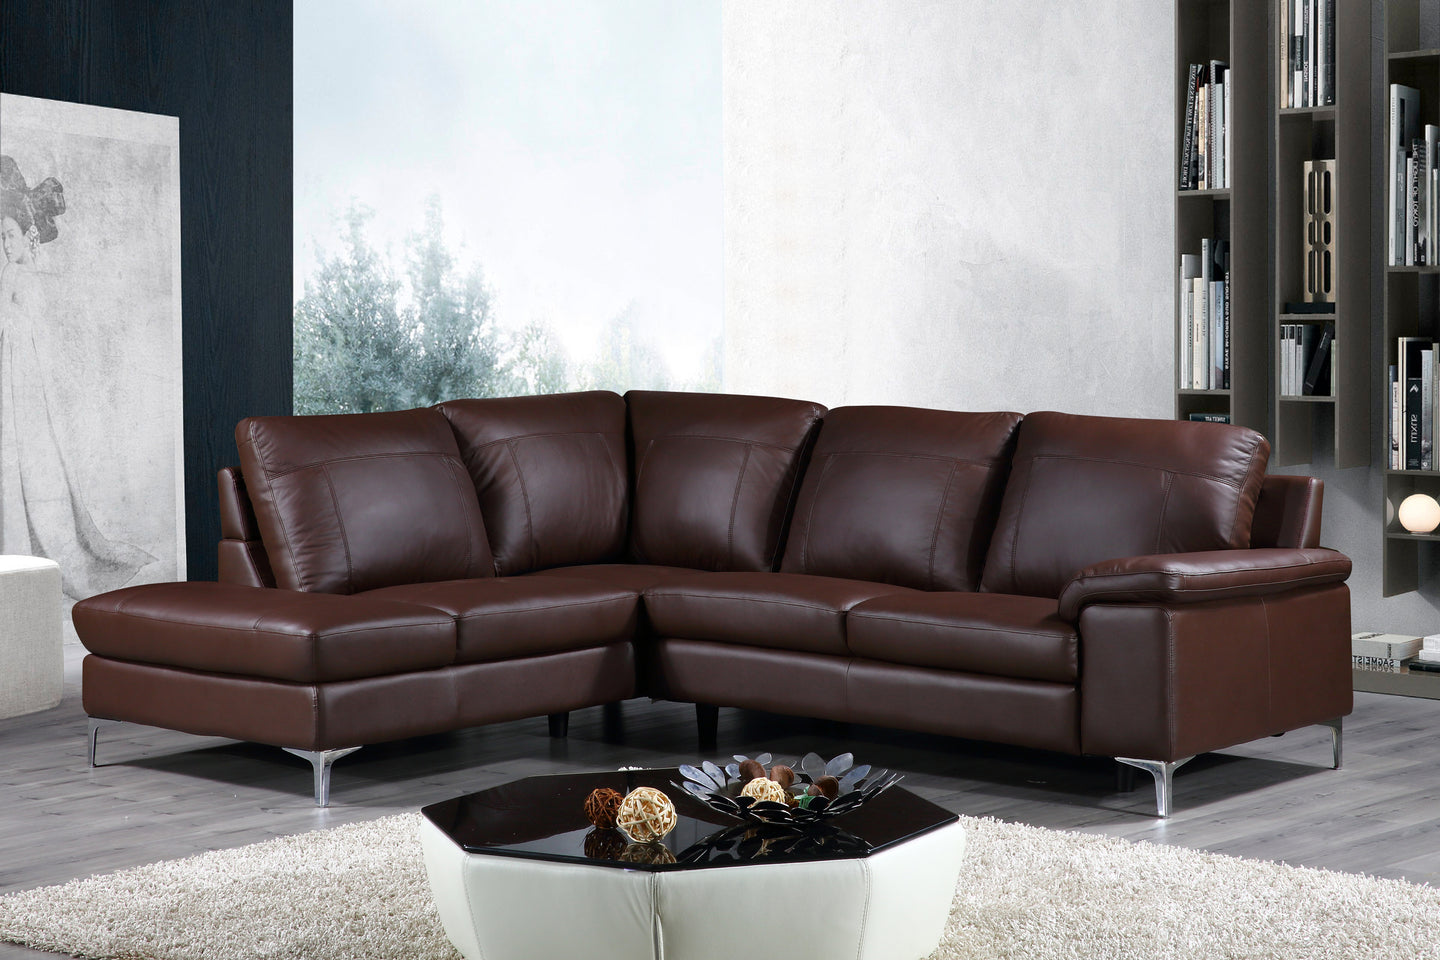 Cortesi Home Contemporary Dallas Genuine Leather Sectional Sofa with Left Side Facing Chaise Lounge, Brown 80